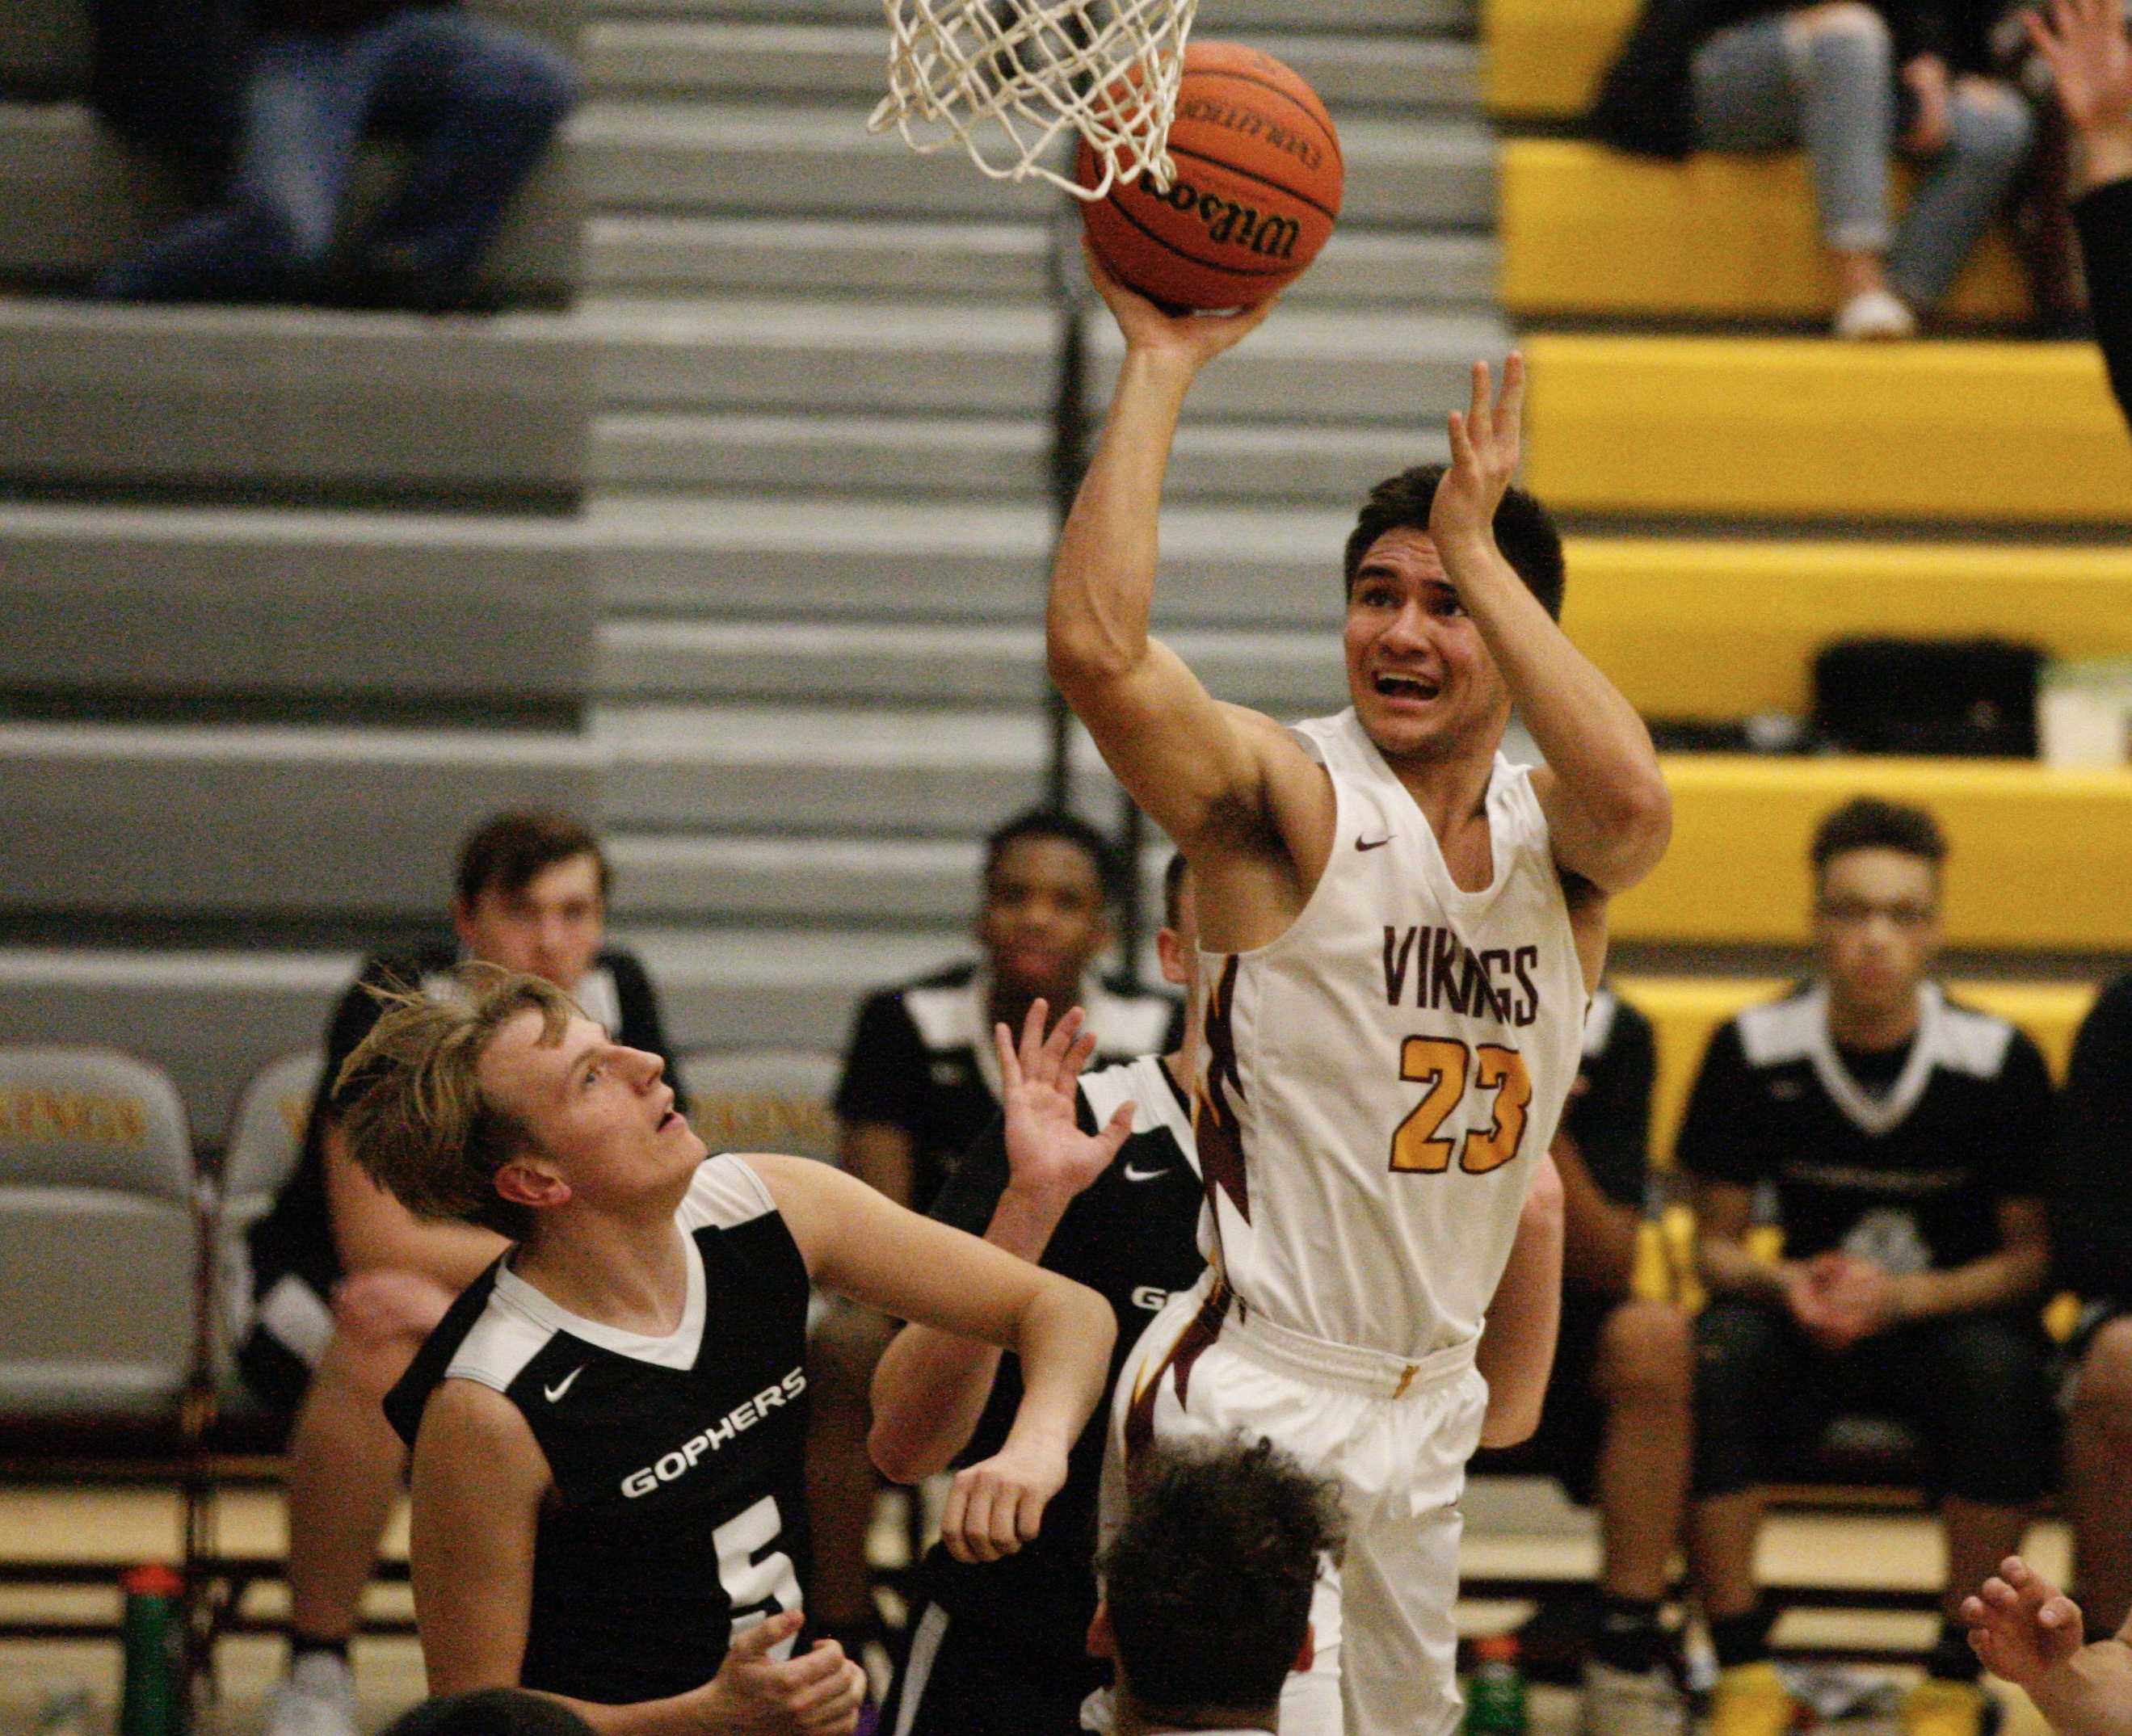 Forest Grove's Guy Littlefield drops a short shot in the key on his way to 20 points Friday. (Photo by Norm Maves Jr.)